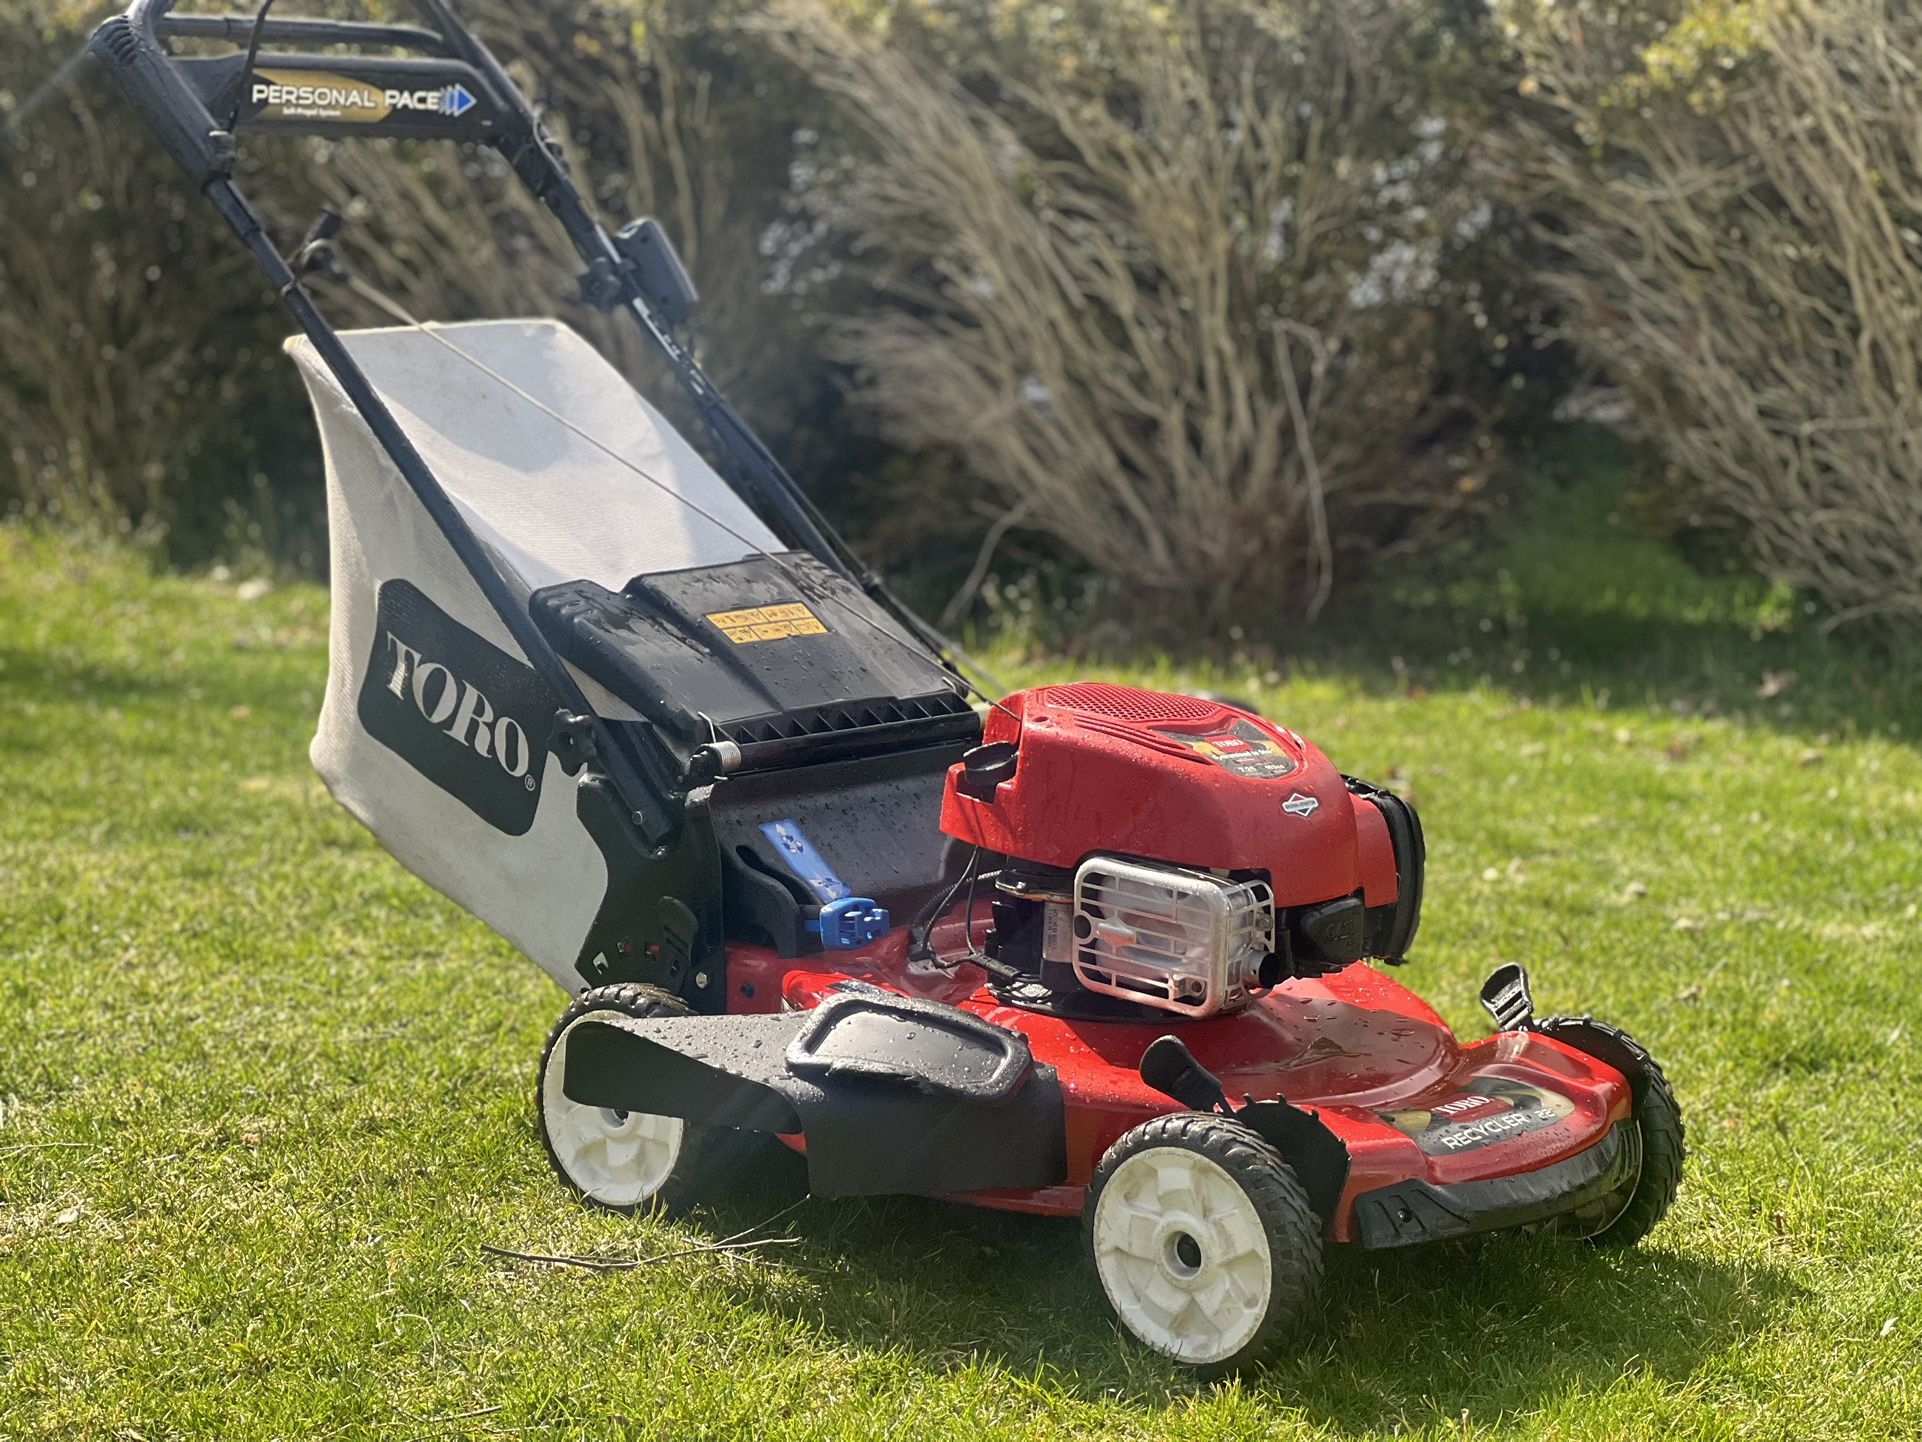 PRO Toro 22” 3n1 SELF PROPELLED Lawn Mower with Push Button Electric Start & MORE 